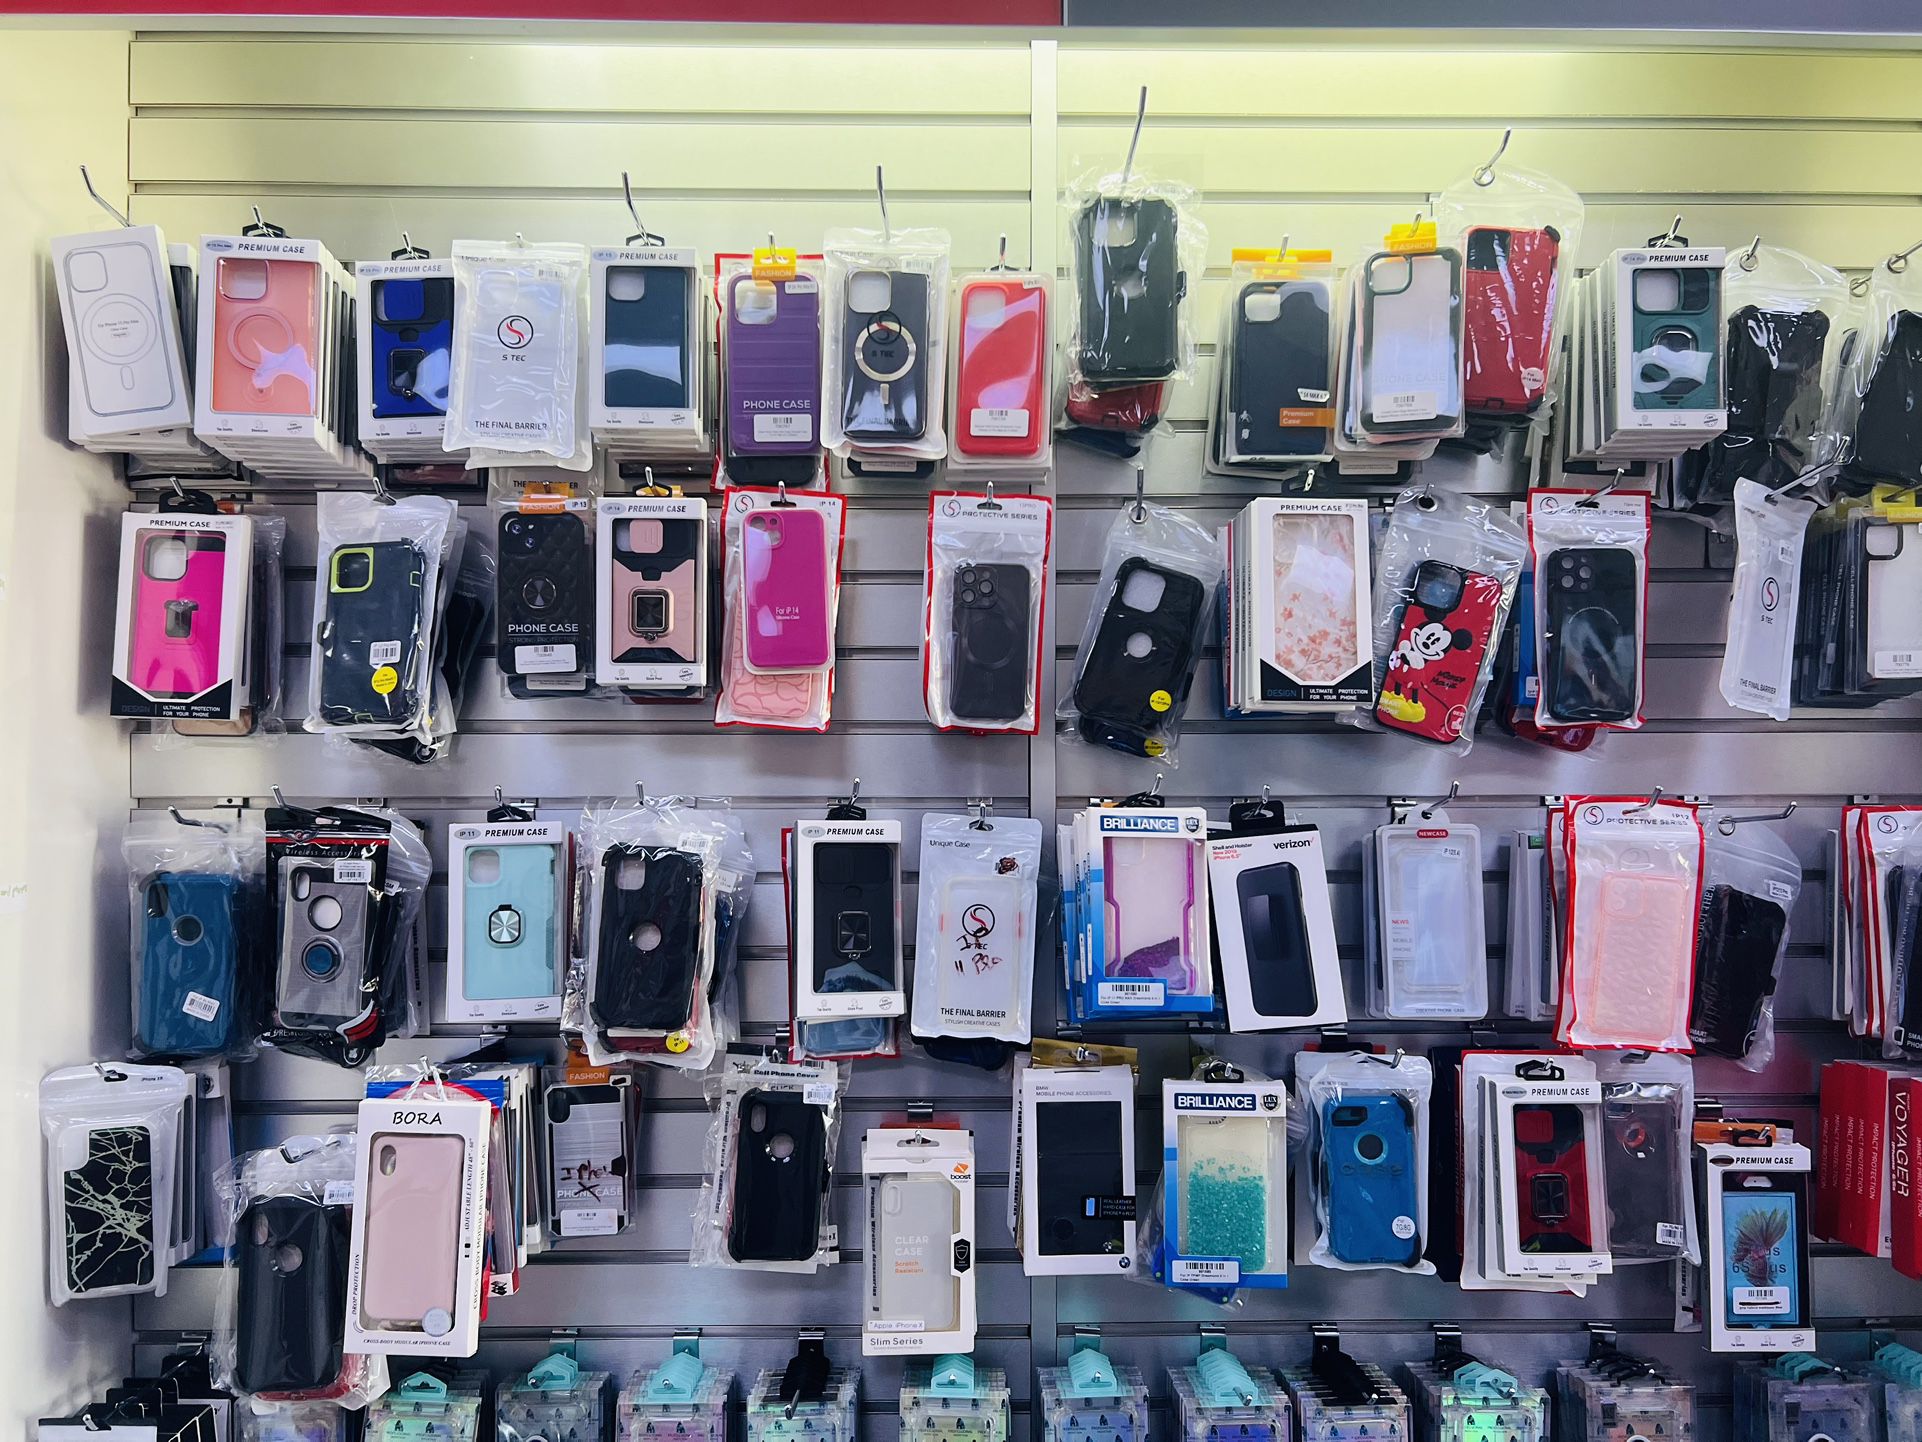 All Kind Of cases For iPhones And Androids Are Available At Store